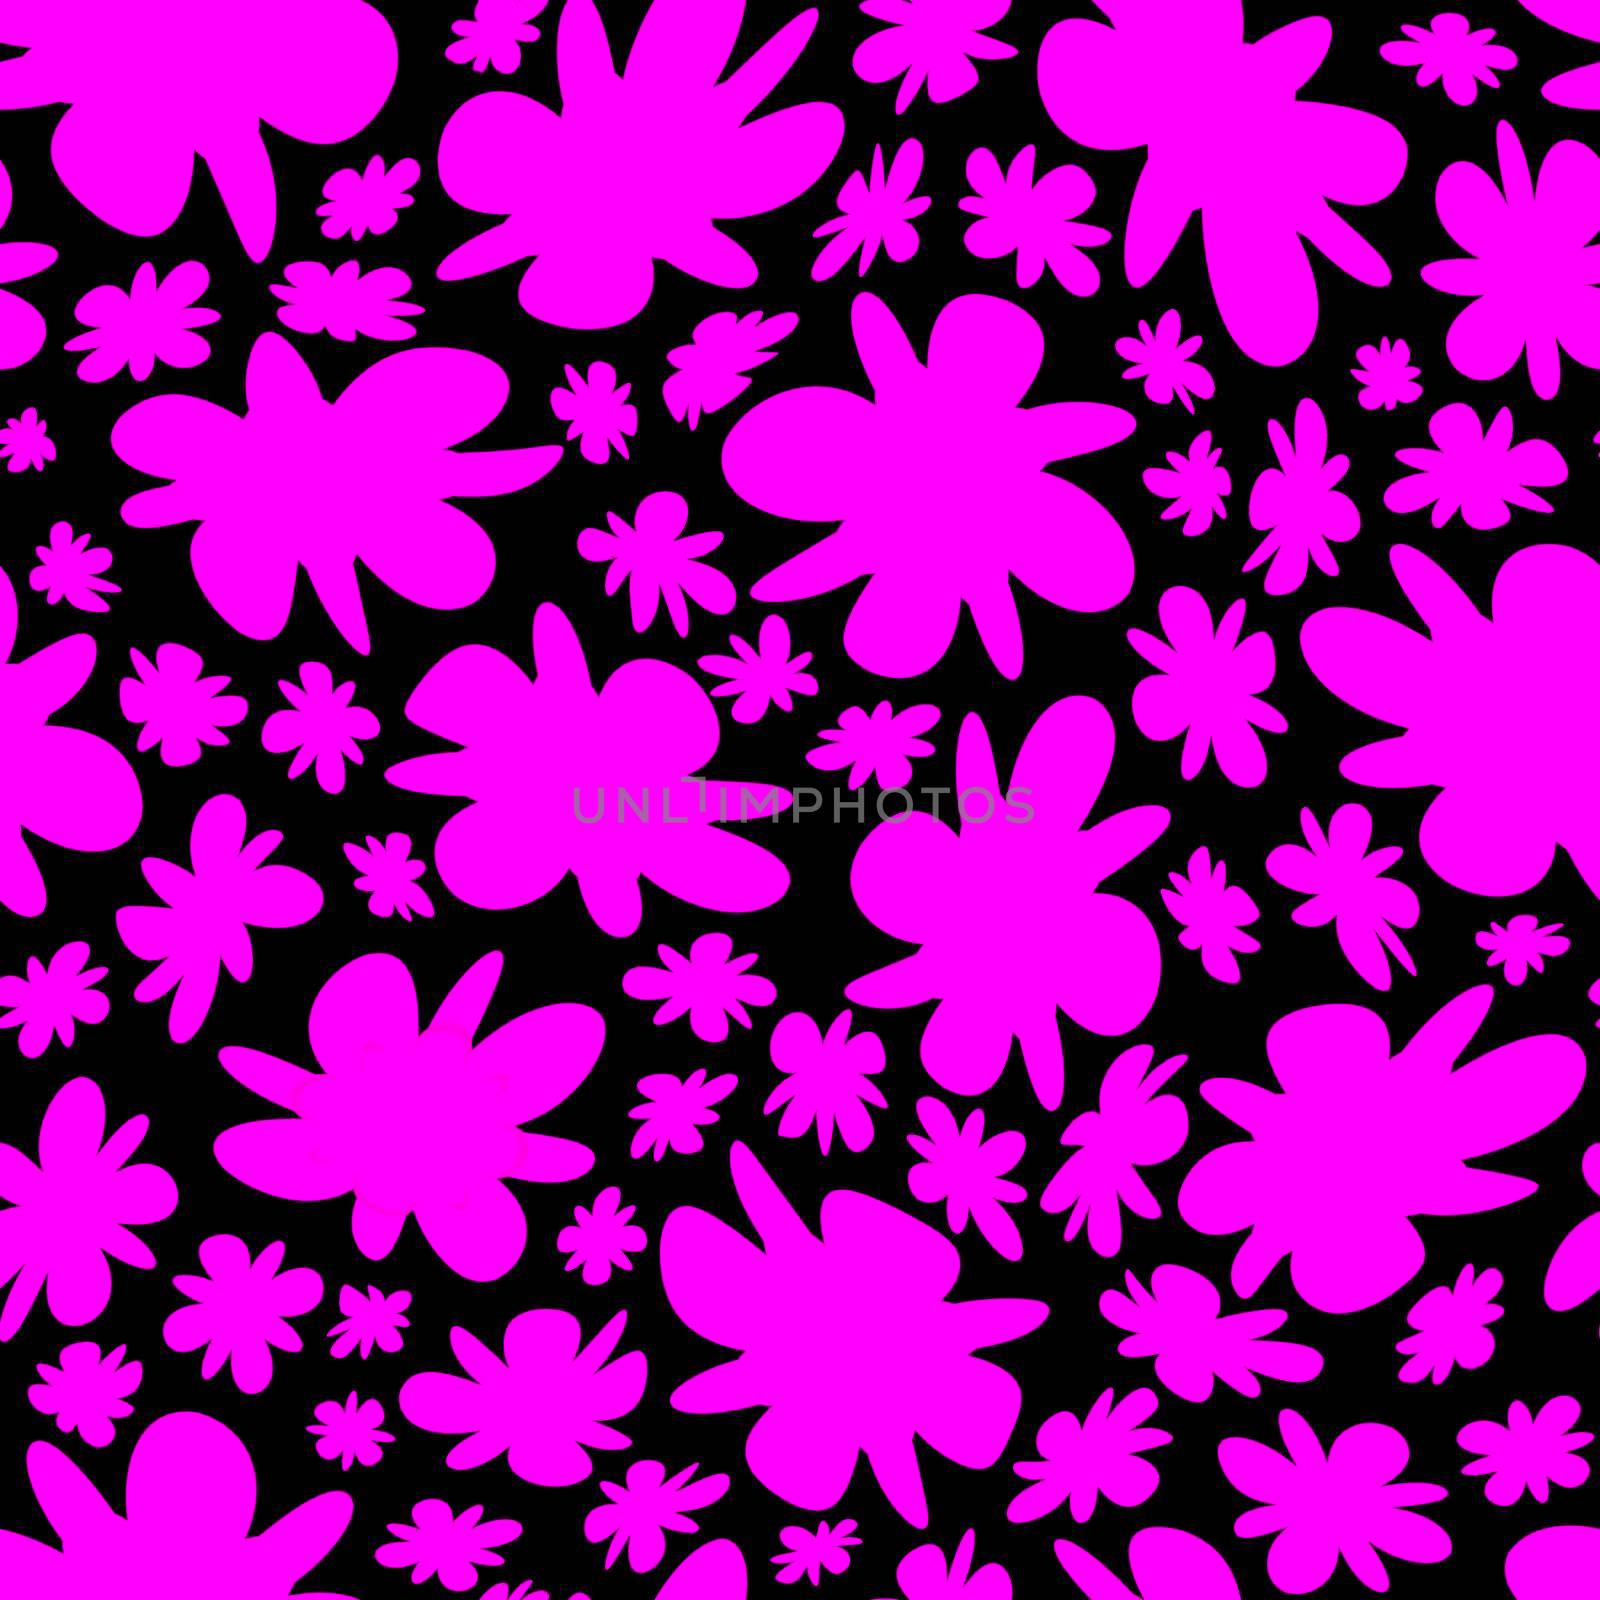 Trendy fabric pattern with miniature flowers.Summer print.Fashion design.Motifs scattered random.Elegant template for fashion prints.Good for fashion,textile,fabric,gift wrapping paper.Pink on black.